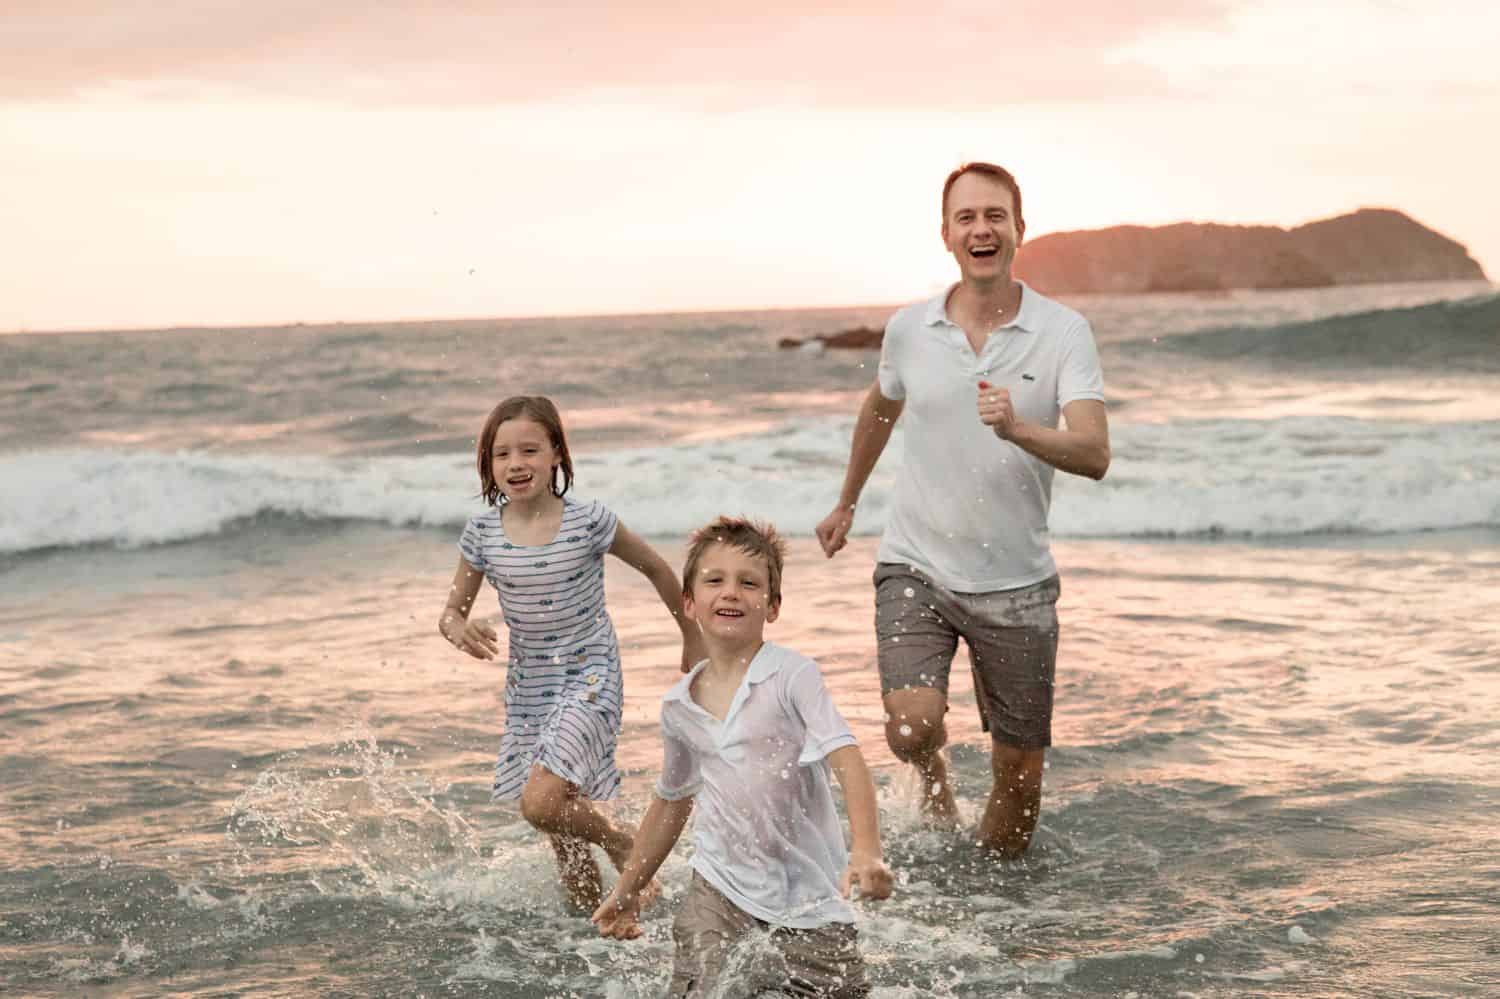 Dad and kids running in the ocean at sunset.